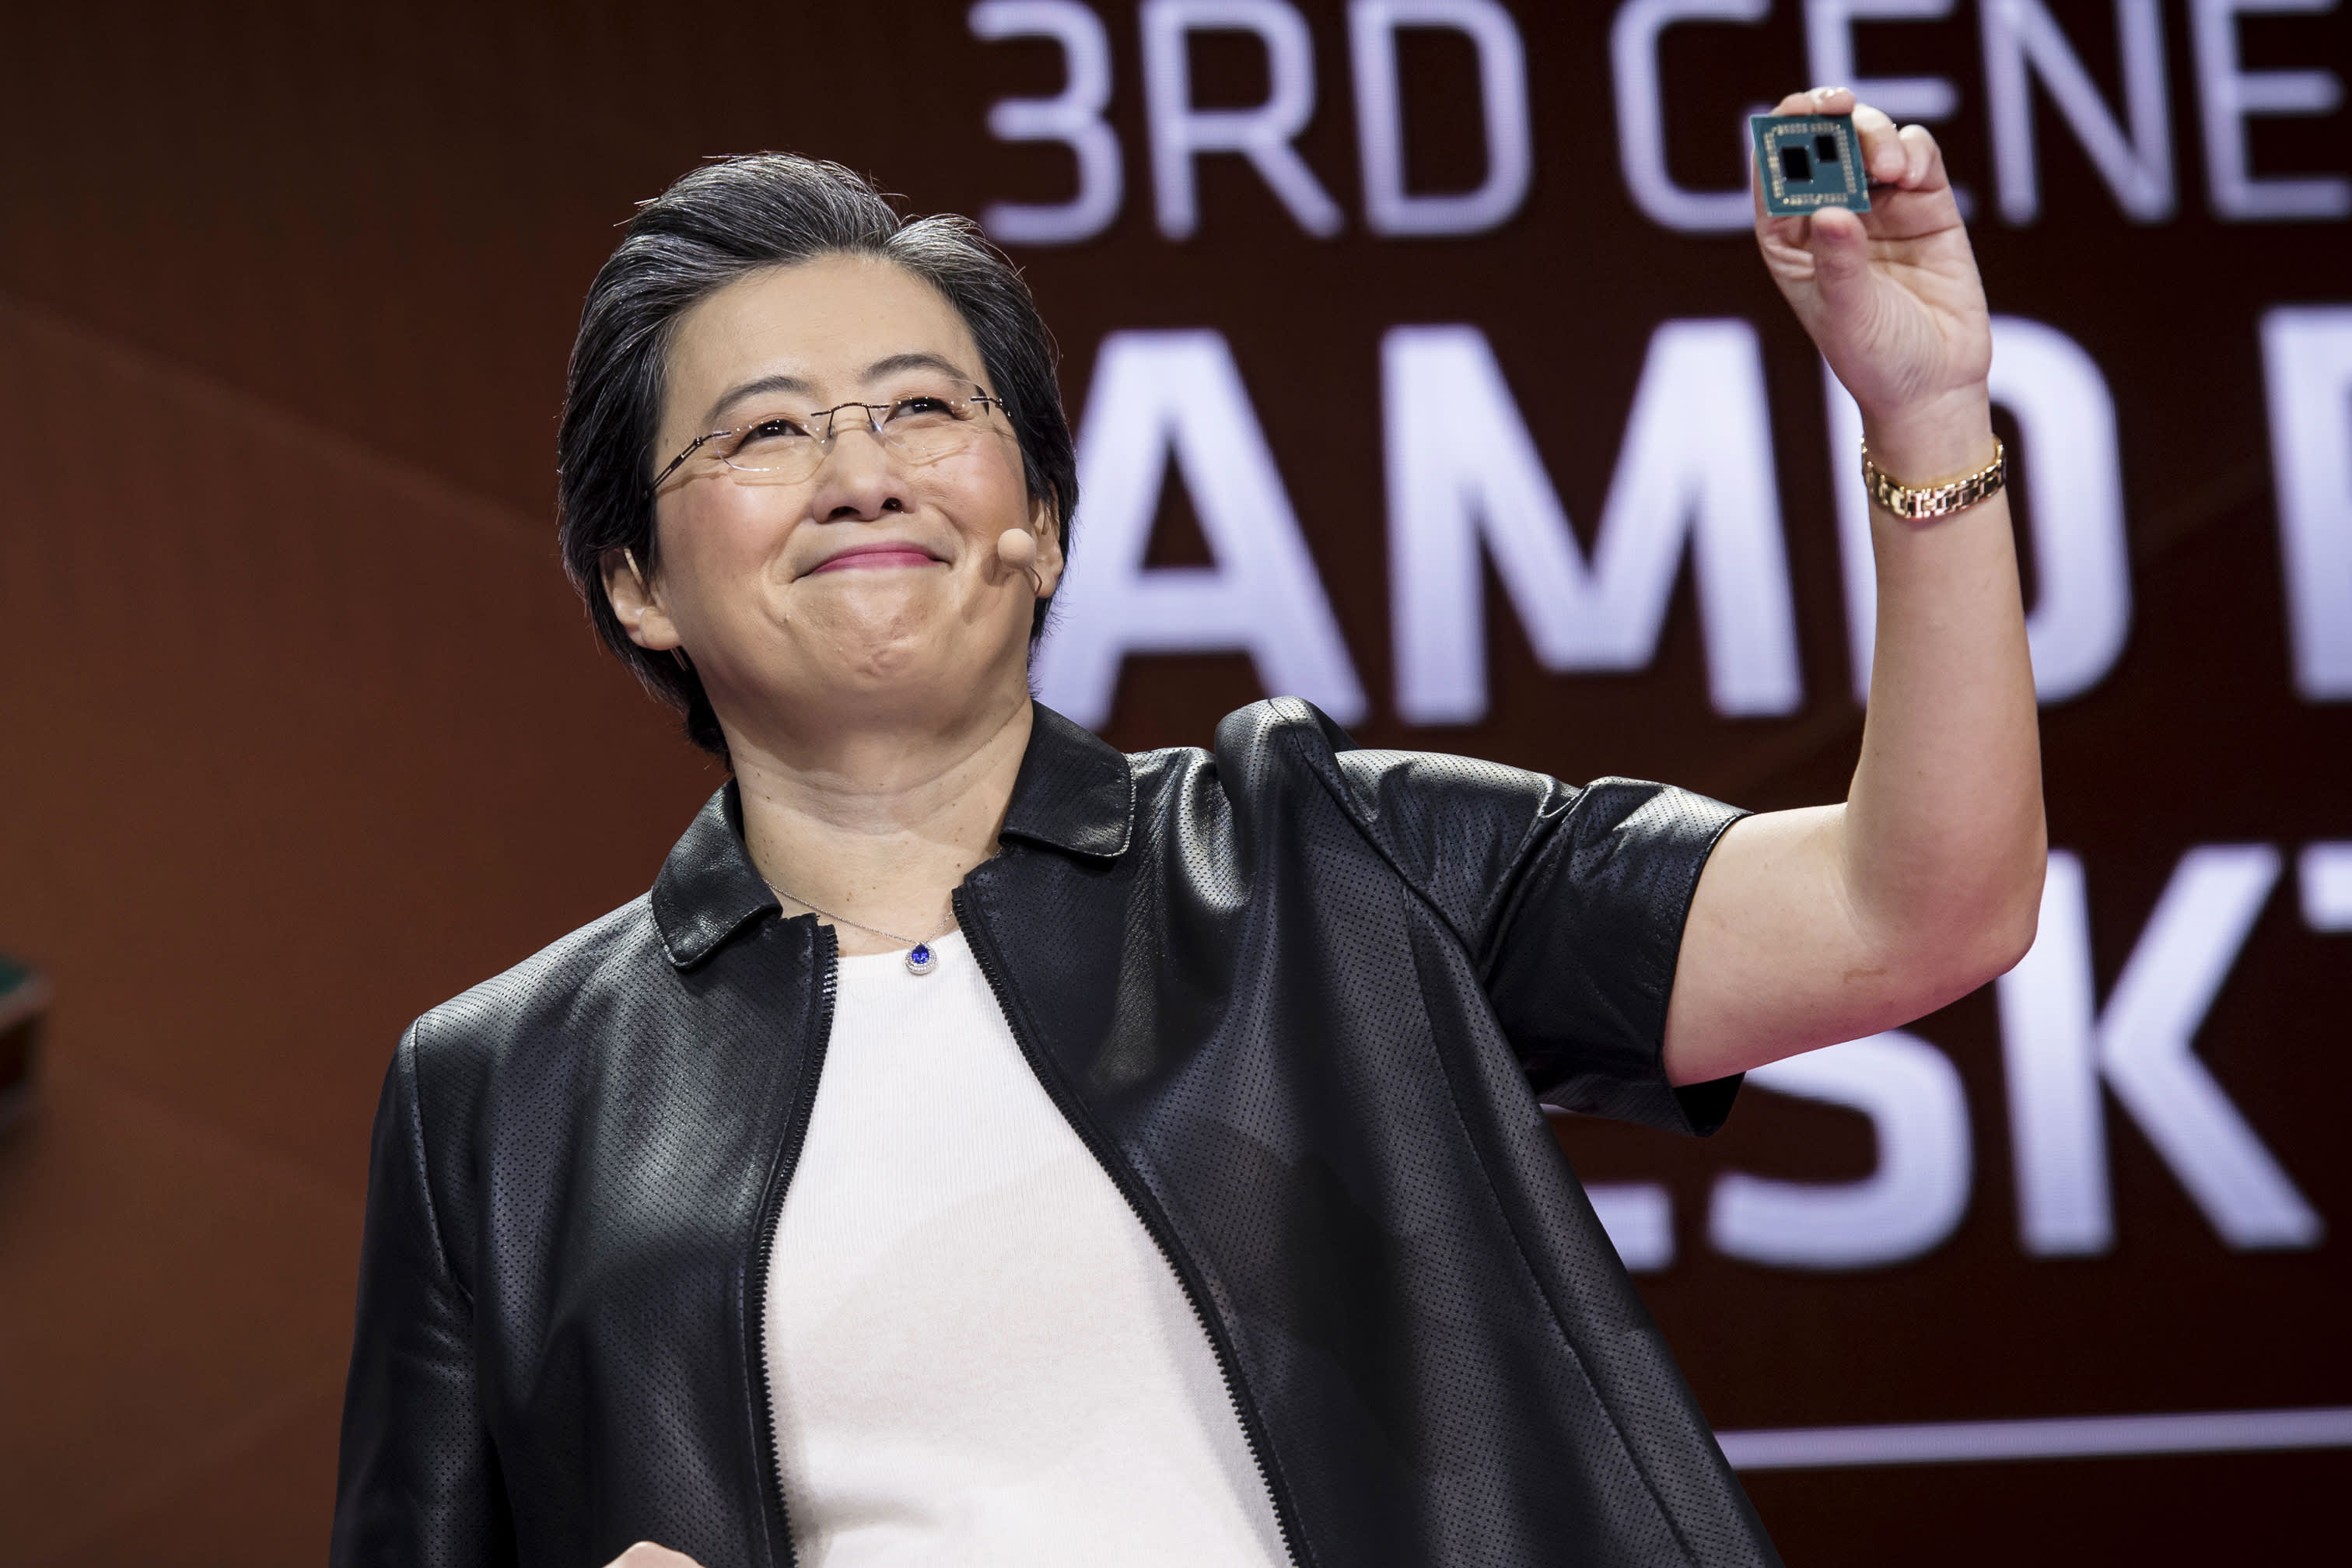 AMD's lackluster forecast sparks selloff in shares